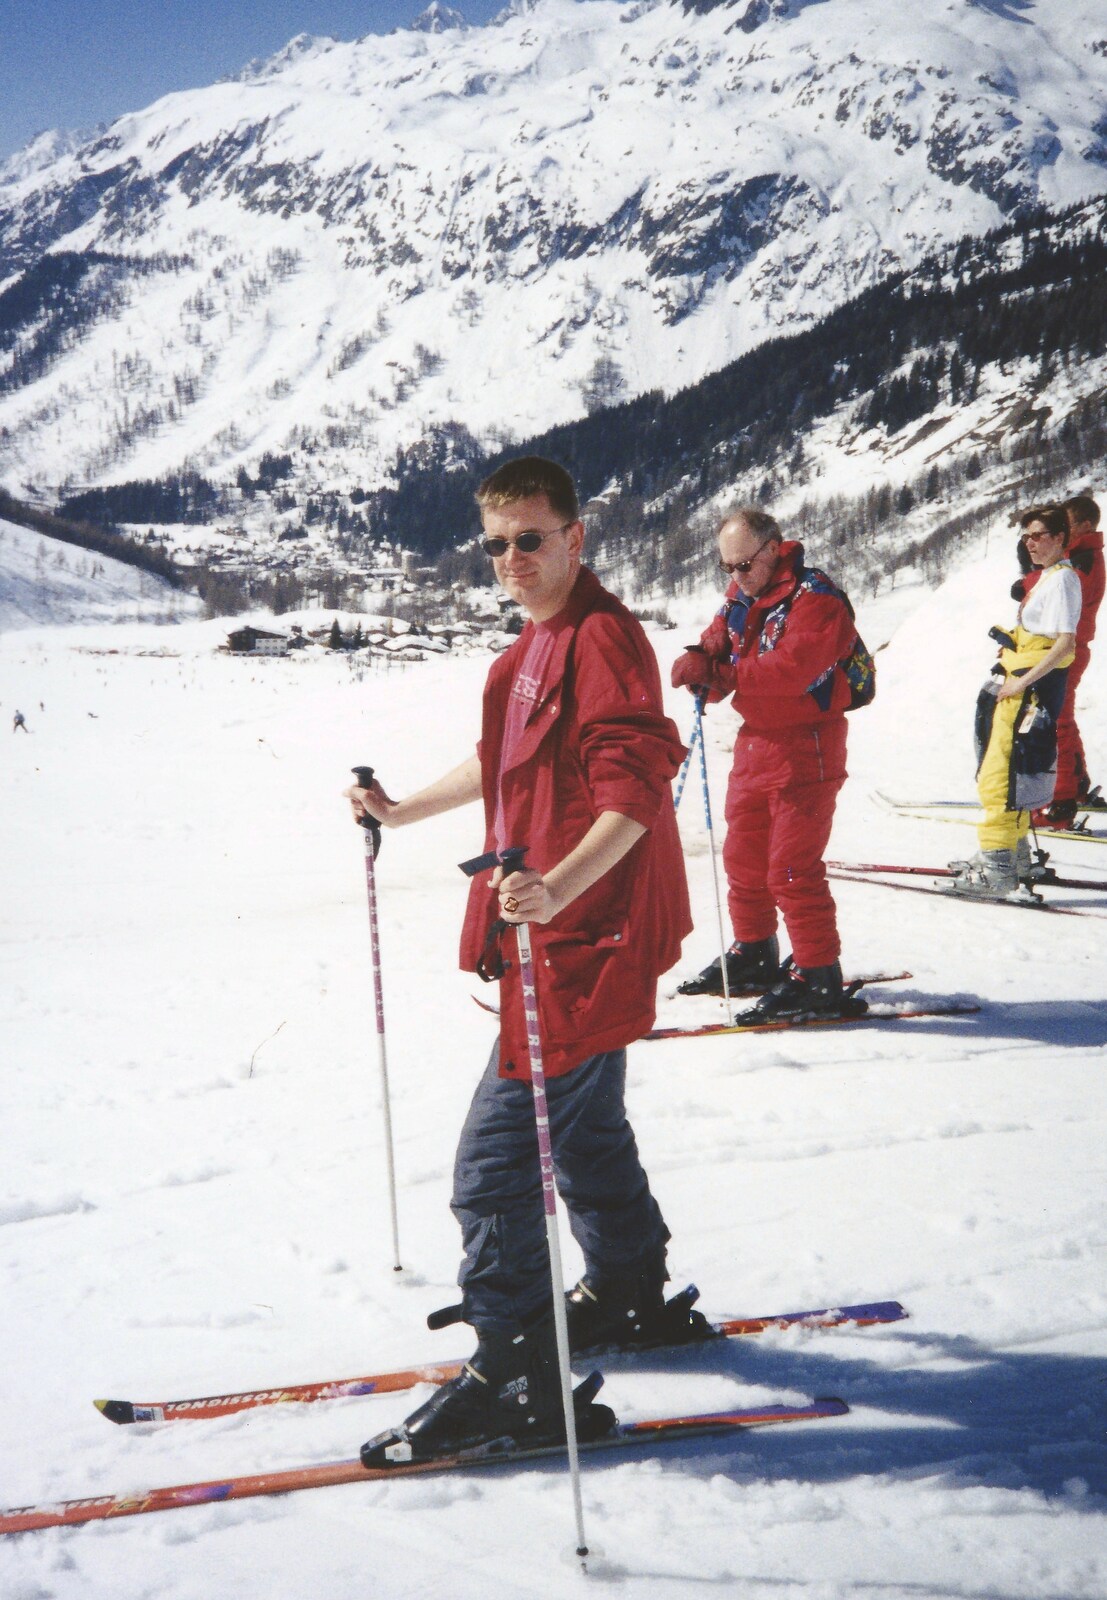 Ready for action from Skiing With Sean, Chamonix, Haute-Savoie, France - 15th March 1999